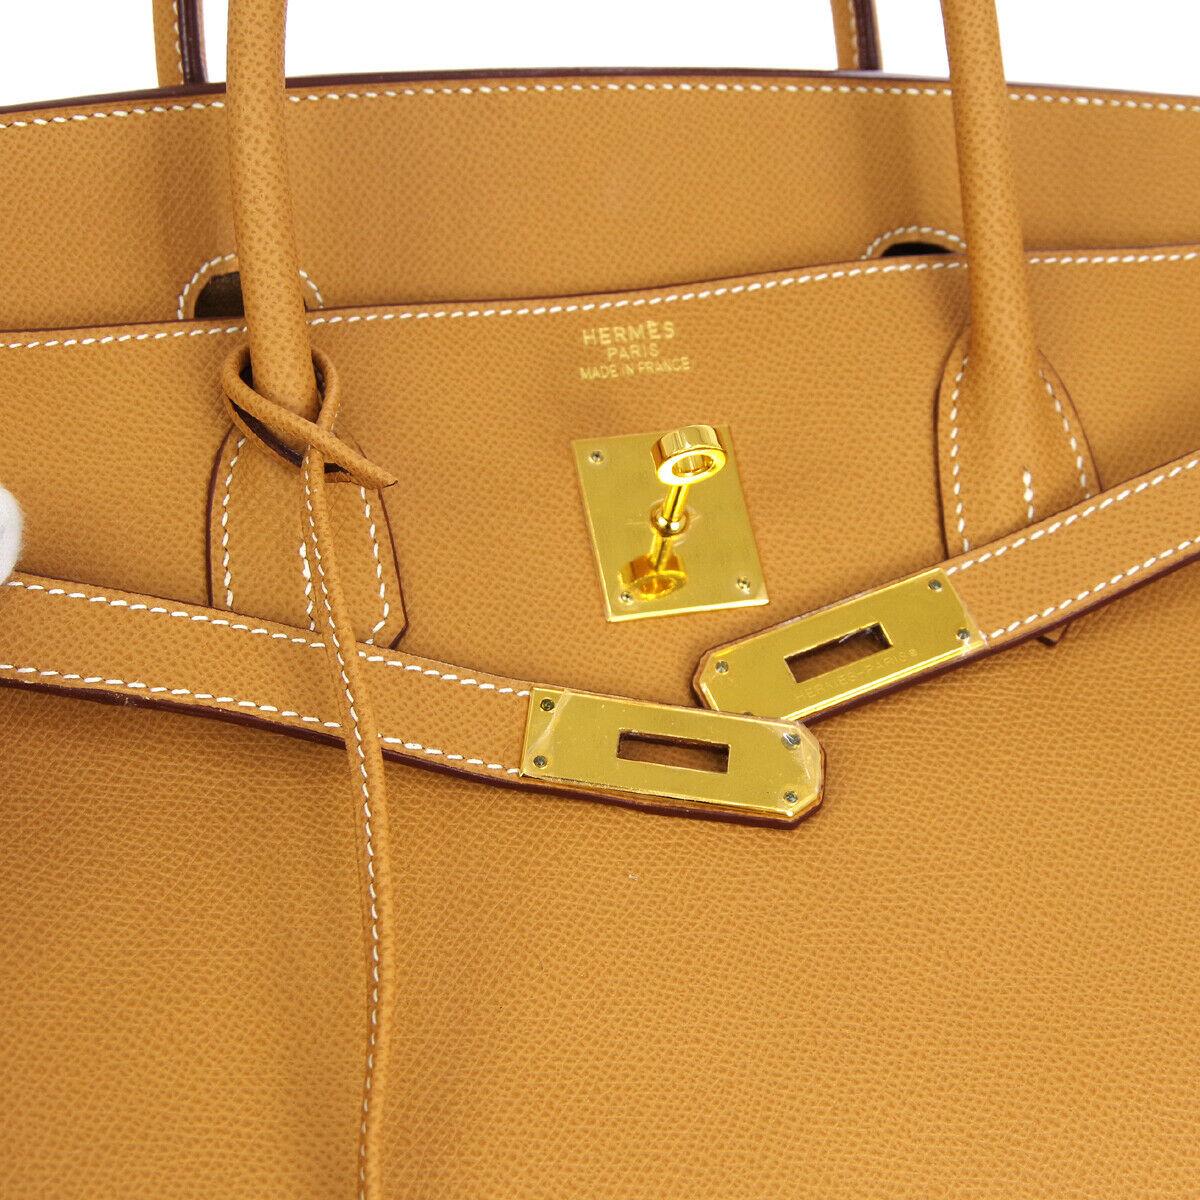 The All-Purpose Hermes Birkin You Need.  

The motherlode of Hermes Birkin bags, this chic and smart Hermes Birkin 40 is the epitome of a lifestyle accessory.  Handcrafted of supple leather and enriched with shiny gold tone hardware, it is ideal for